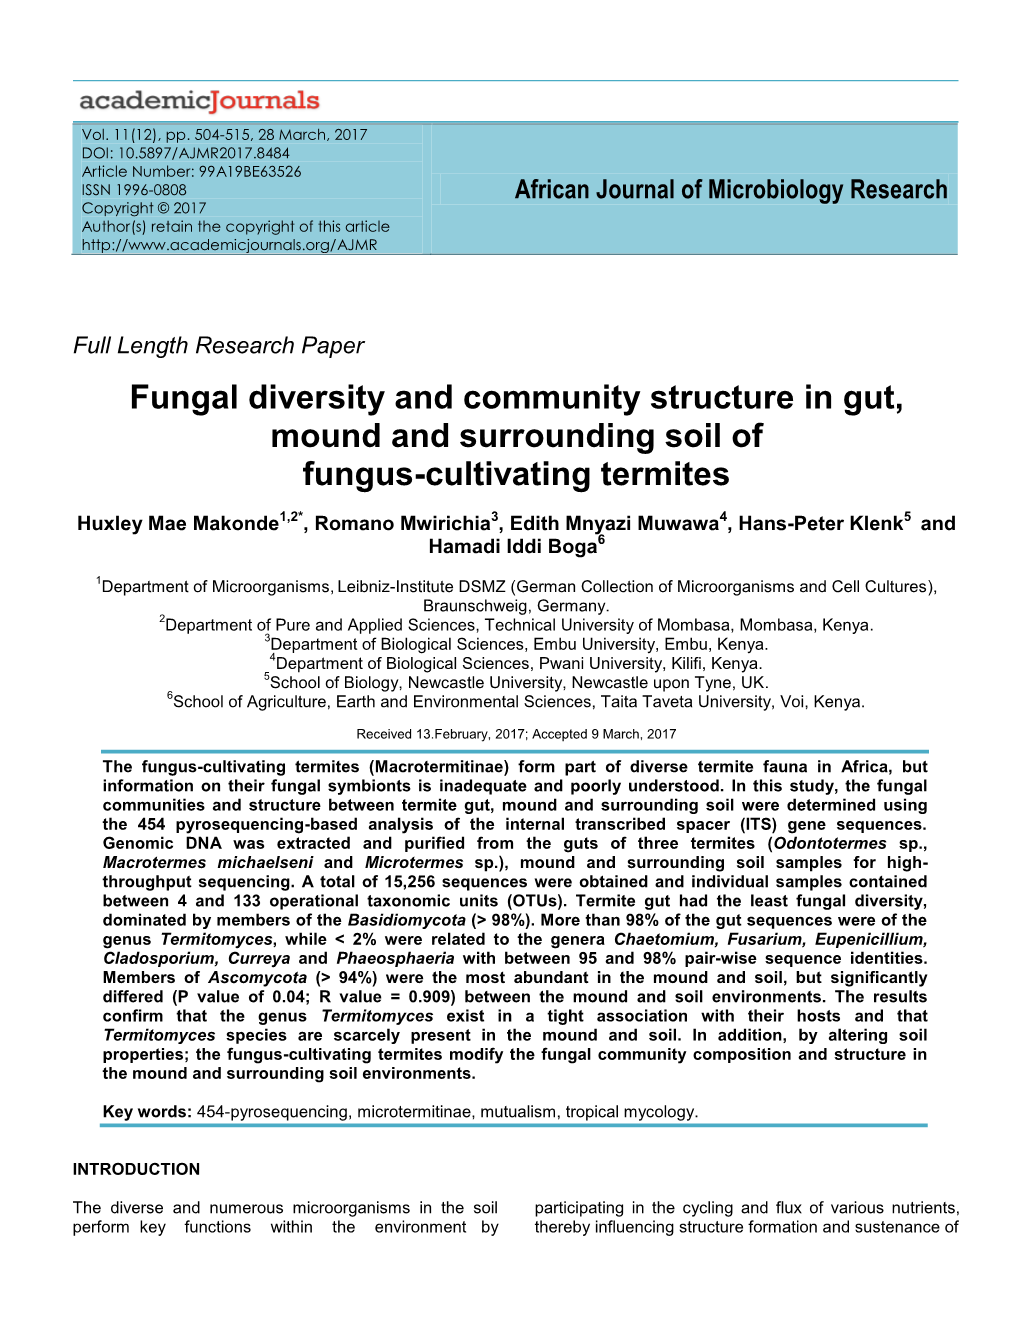 Fungal Diversity and Community Structure in Gut, Mound and Surrounding Soil of Fungus-Cultivating Termites